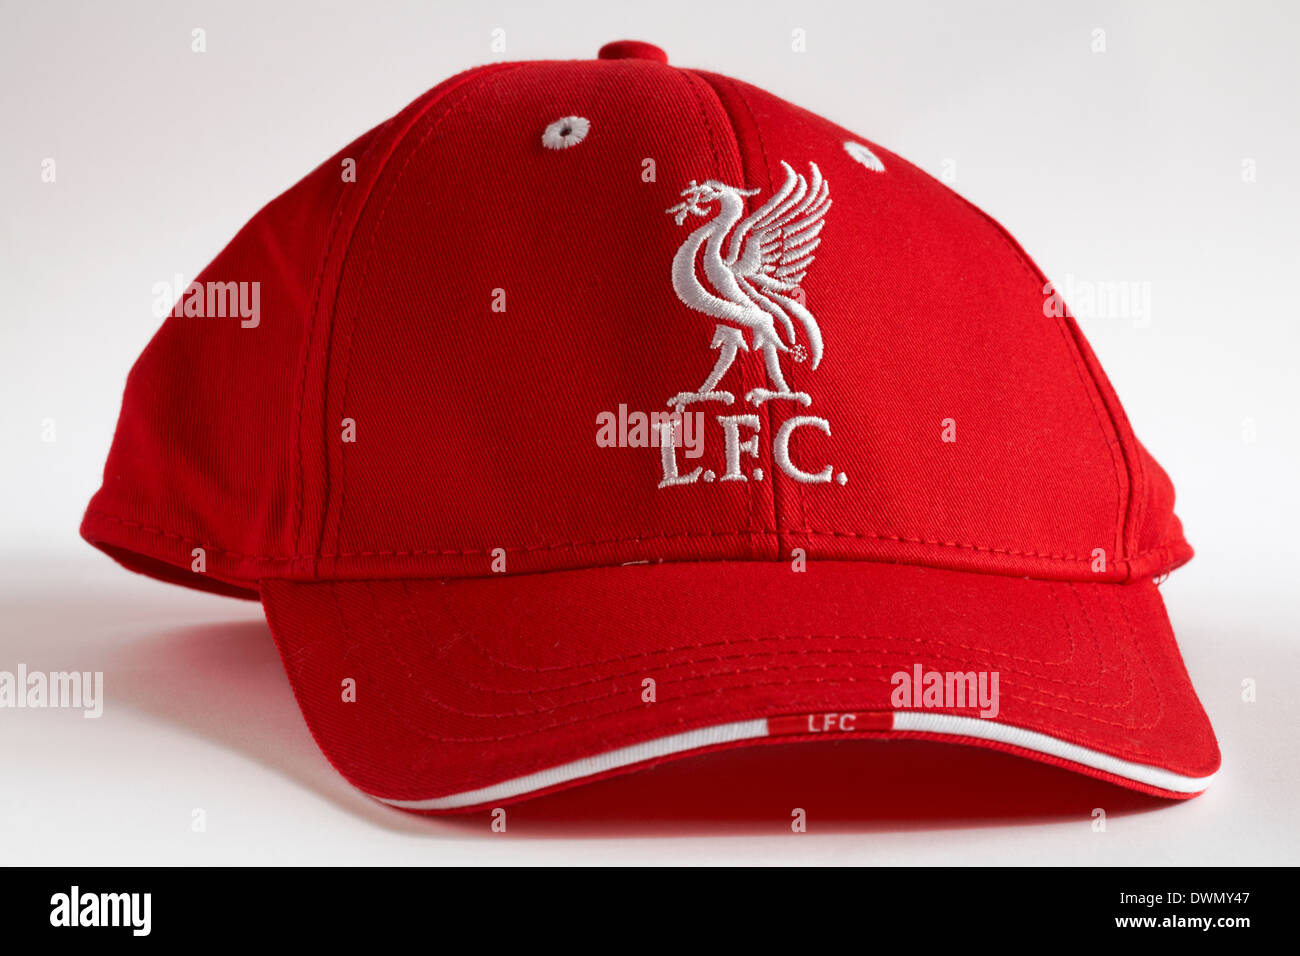 Liverpool Football Club baseball cap isolated on white background Stock Photo